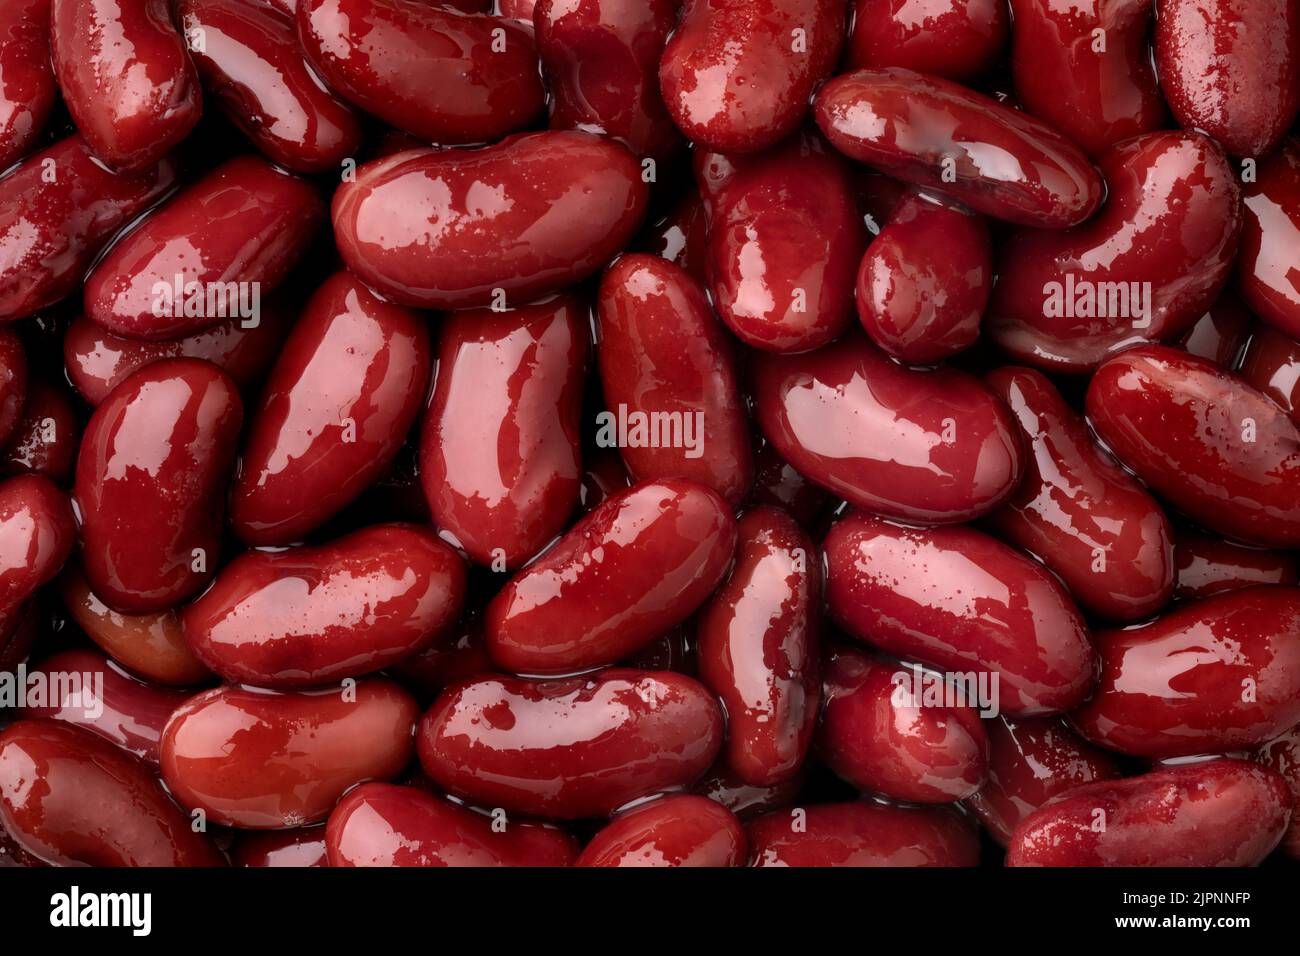 Preserved steamed kidney beans close up full frame as background Stock Photo